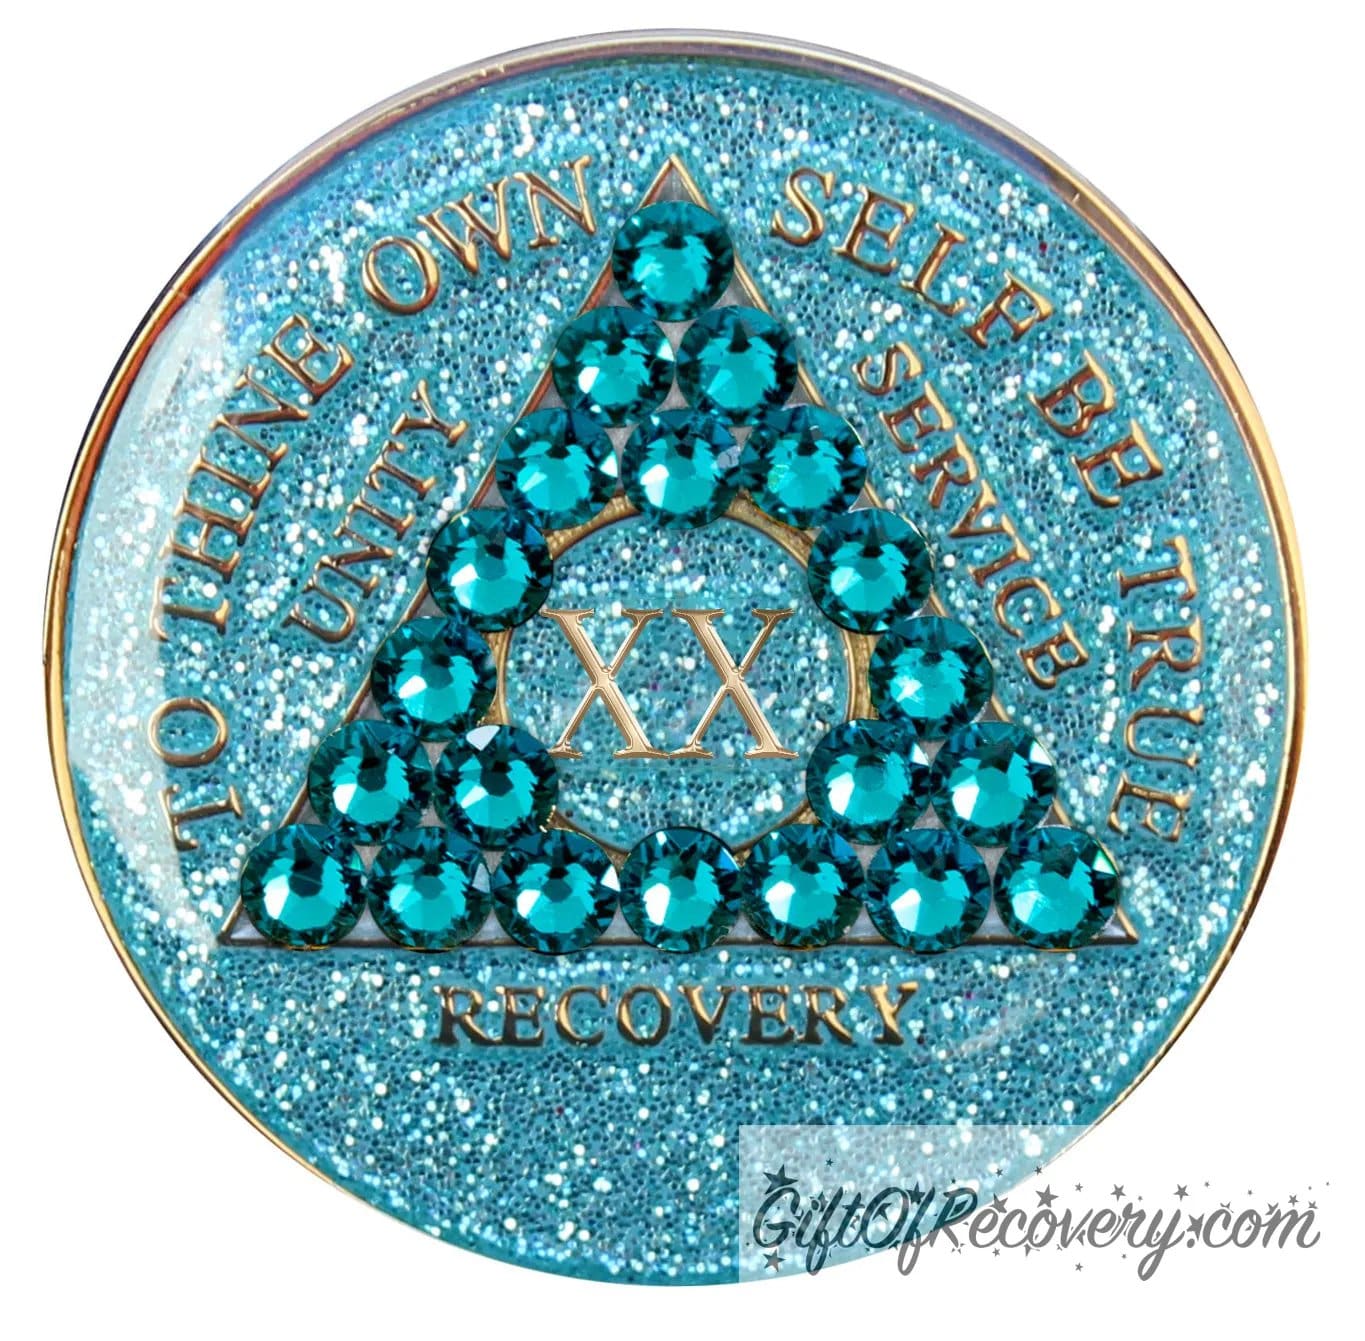 20 year AA medallion in aqua glitter with to thine own self be true, unity, service, recovery, the roman numeral in the center, and the outer rim of the medallion embossed in 14k gold plated brass, the center triangle has 21 genuine blue zircon crystal to give it a sparkle, it is sealed with resin for a shiny finish.